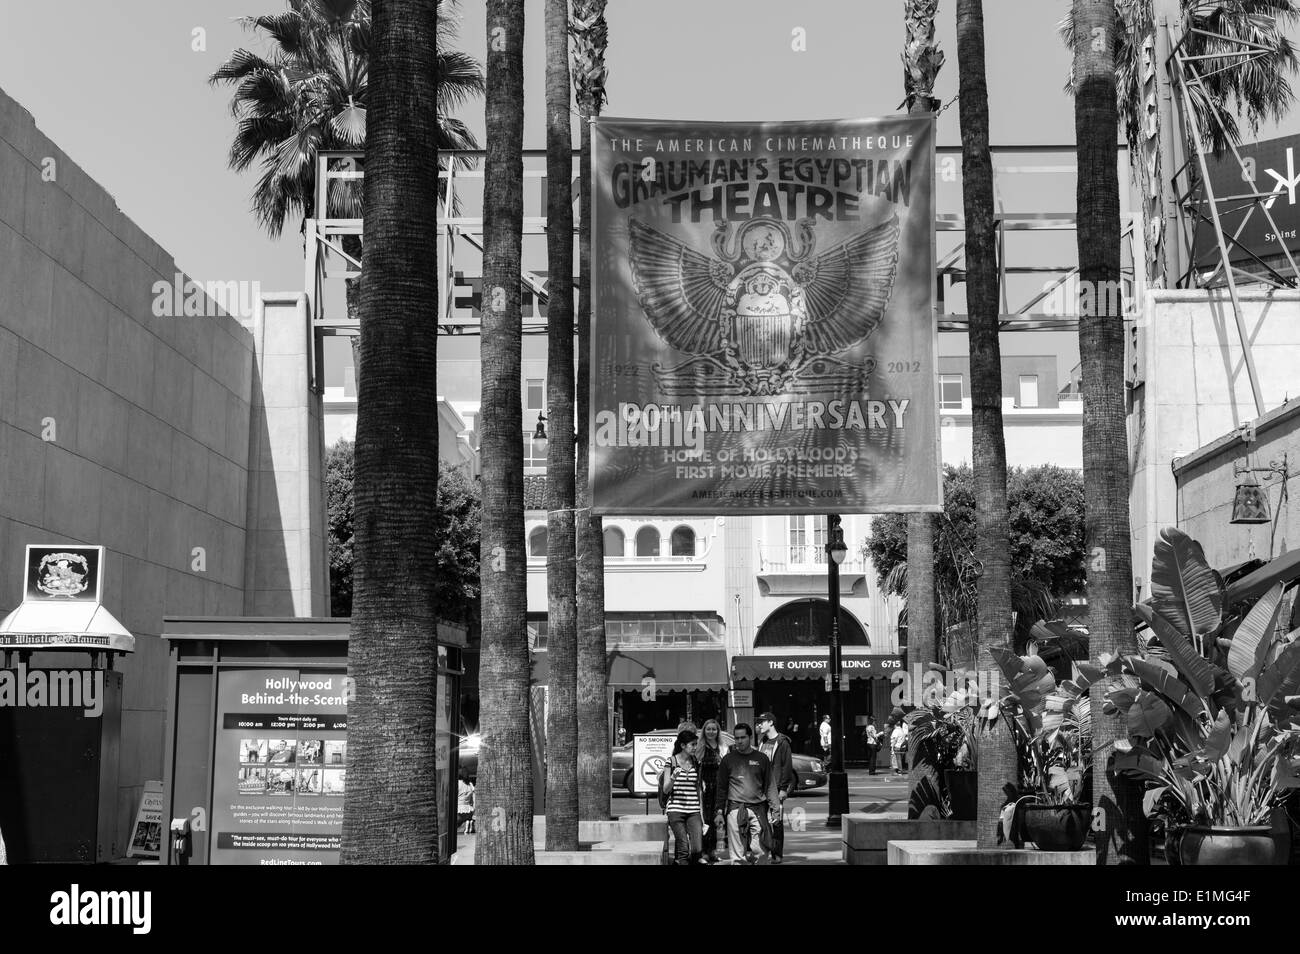 Hollywood Boulevard Egyptian Theatre. Banque D'Images